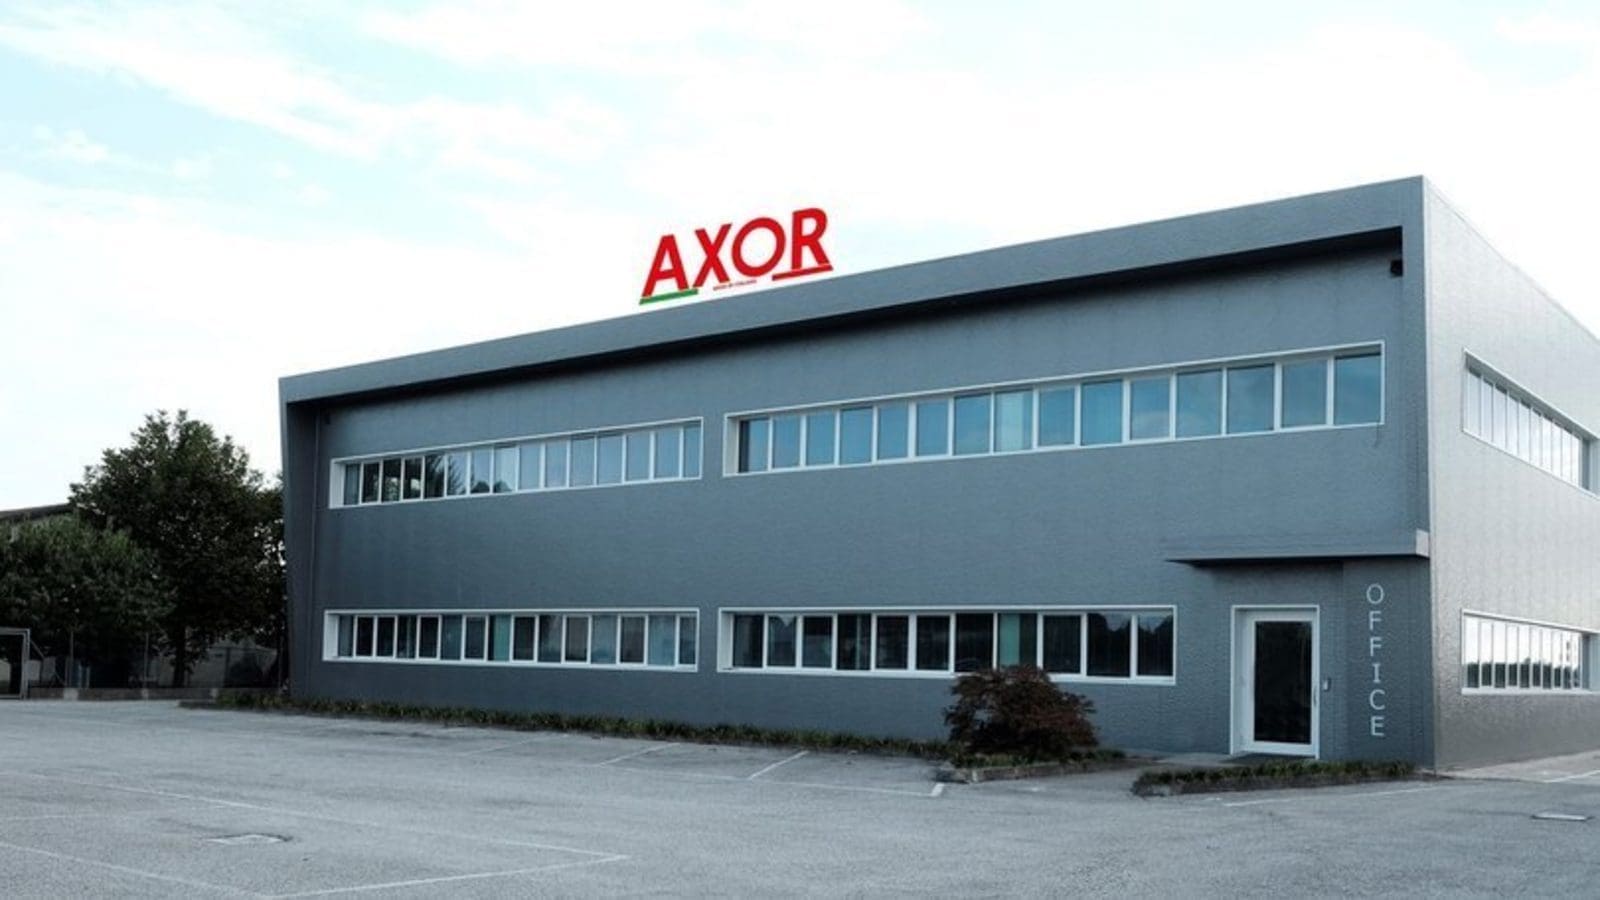 Alapala expands capabilities in pasta production technology with acquisition of Axor Srl